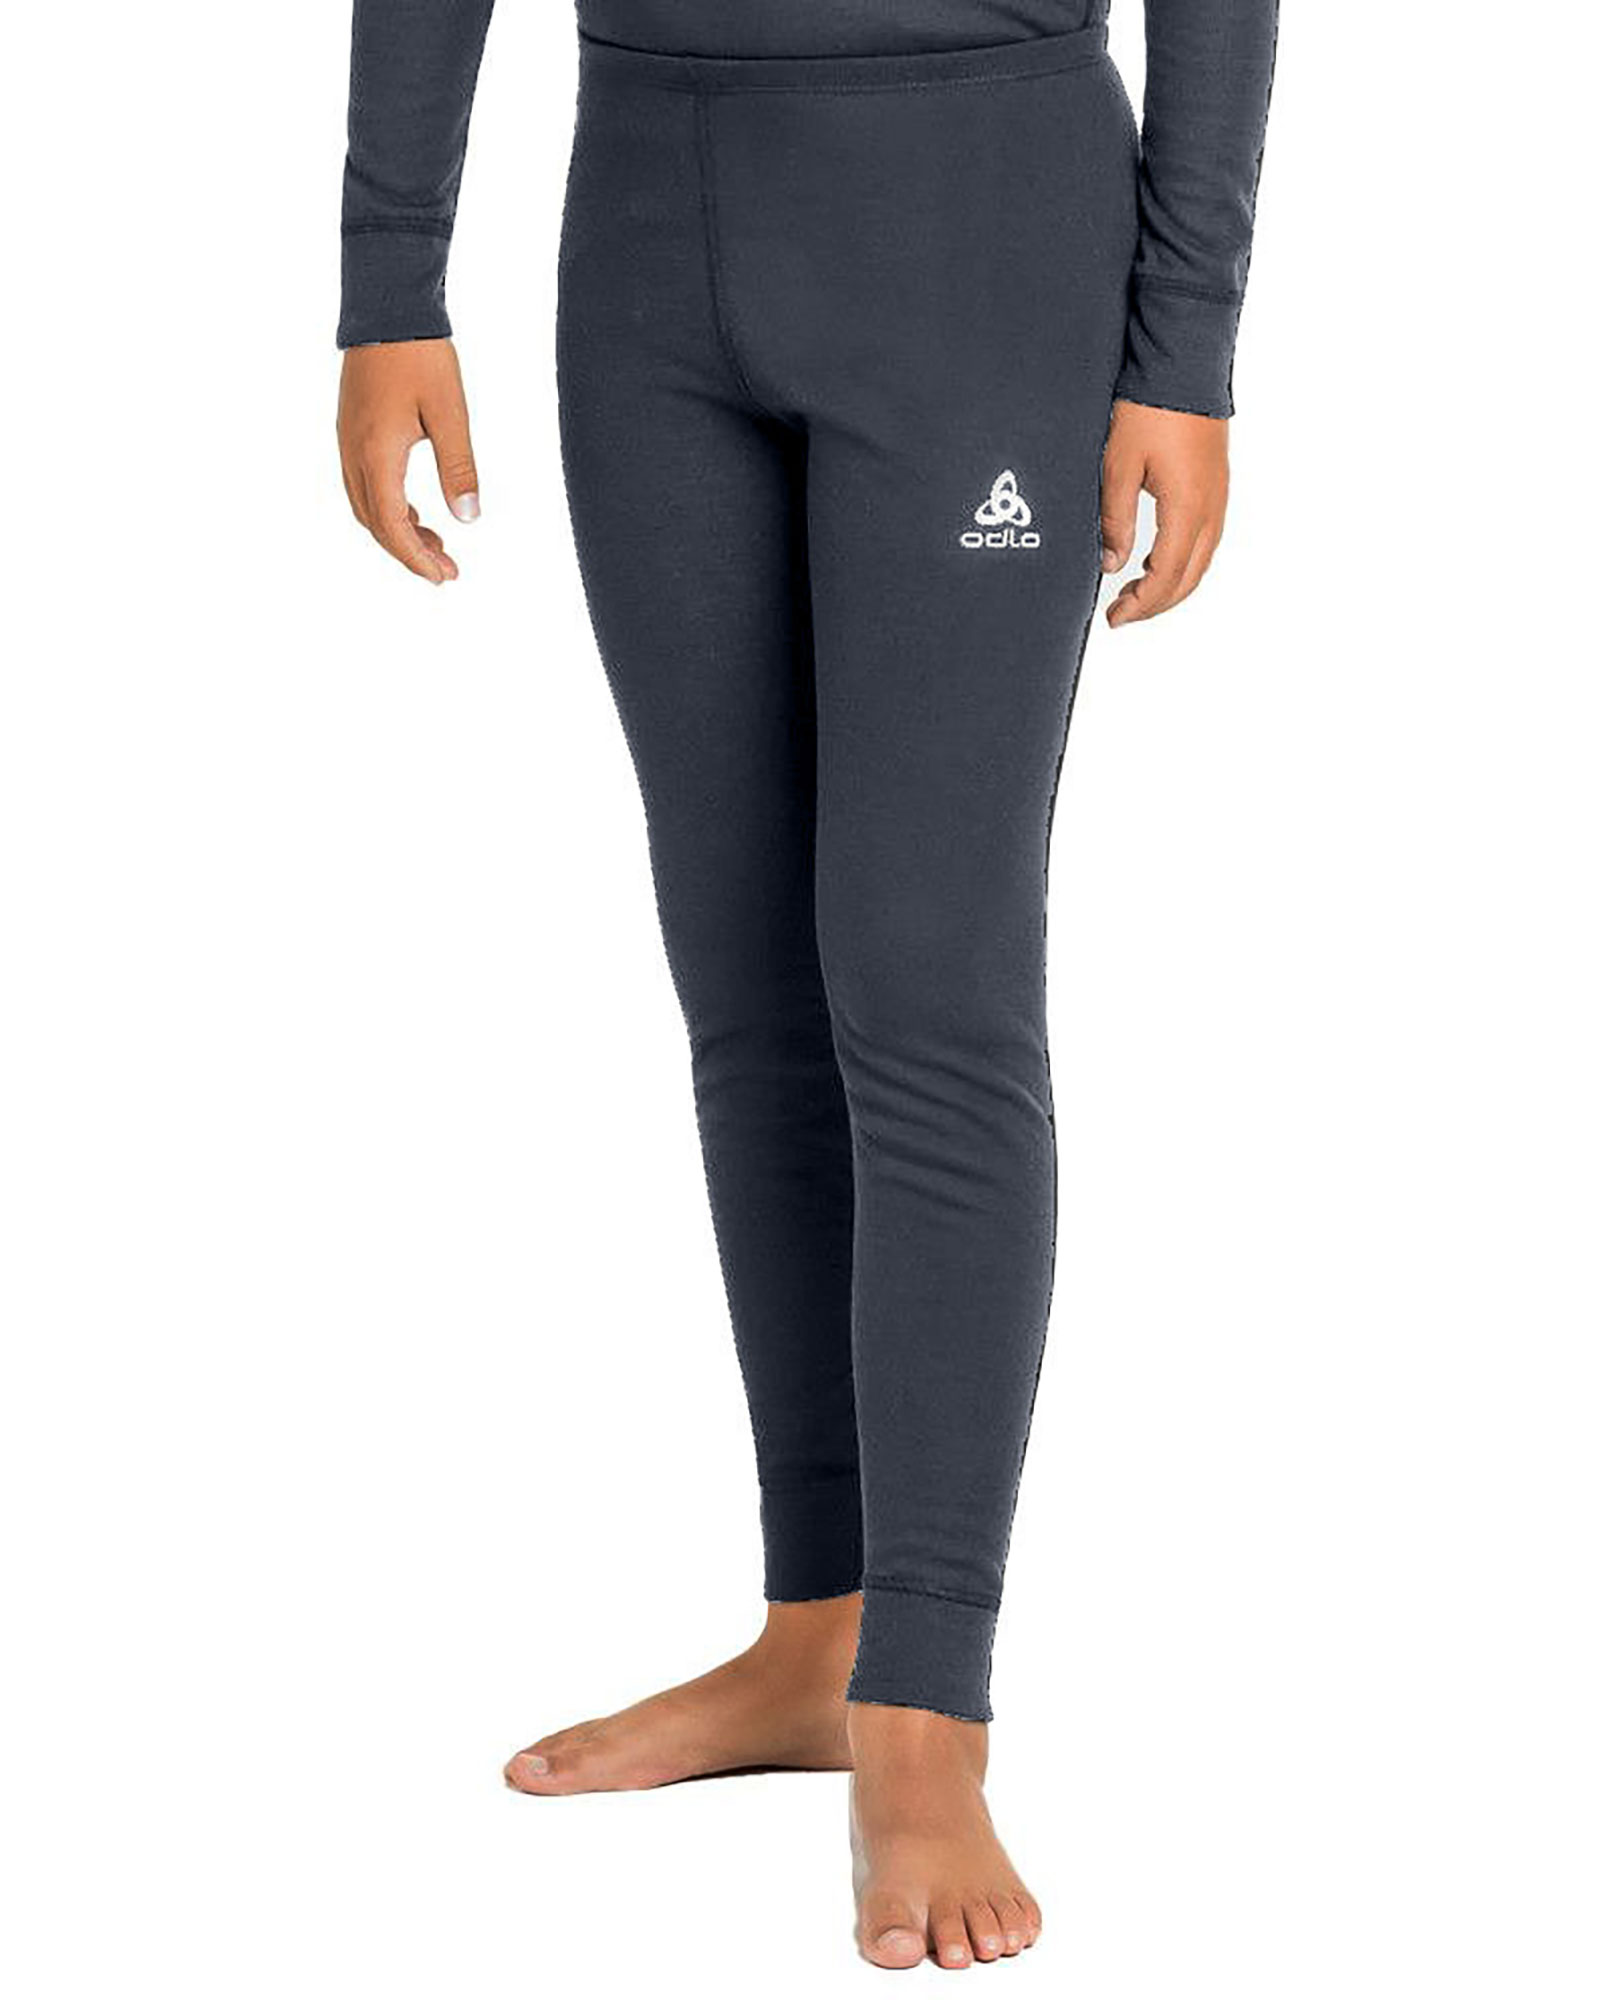 Odlo Active Warm Eco BL Kids’ Bottoms Long - India Ink 4 Years